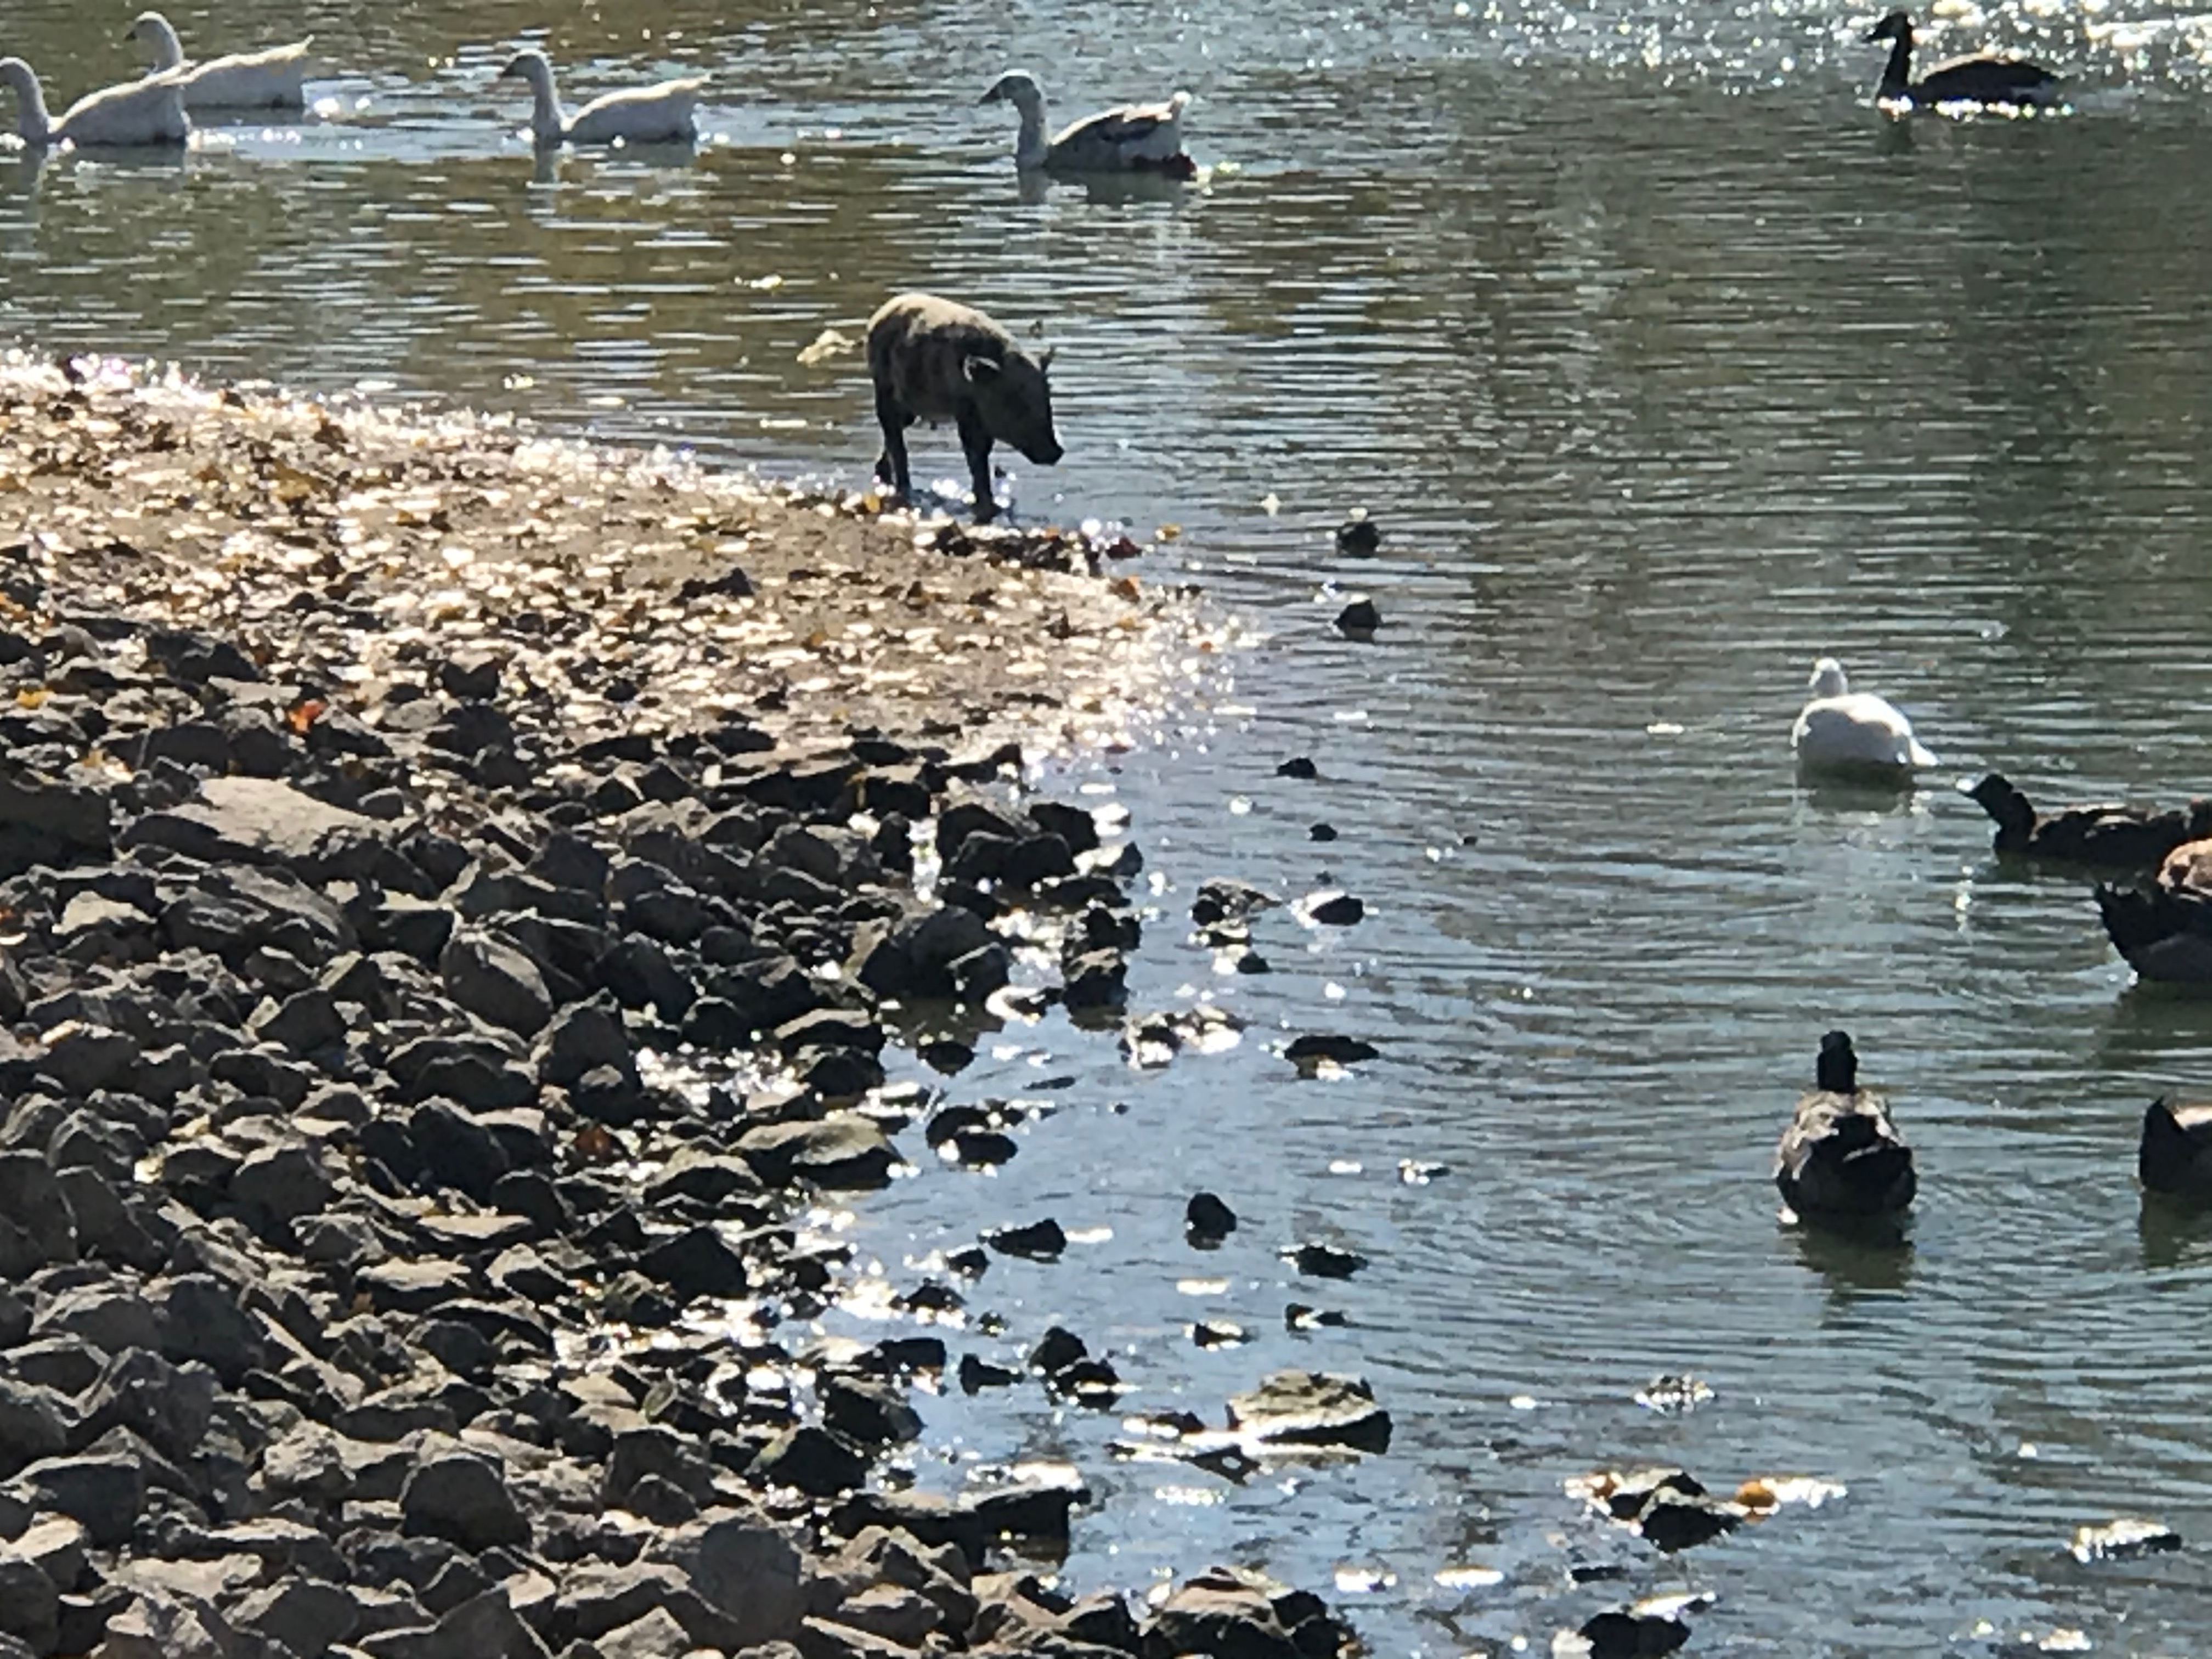 Piglet at pond with birds